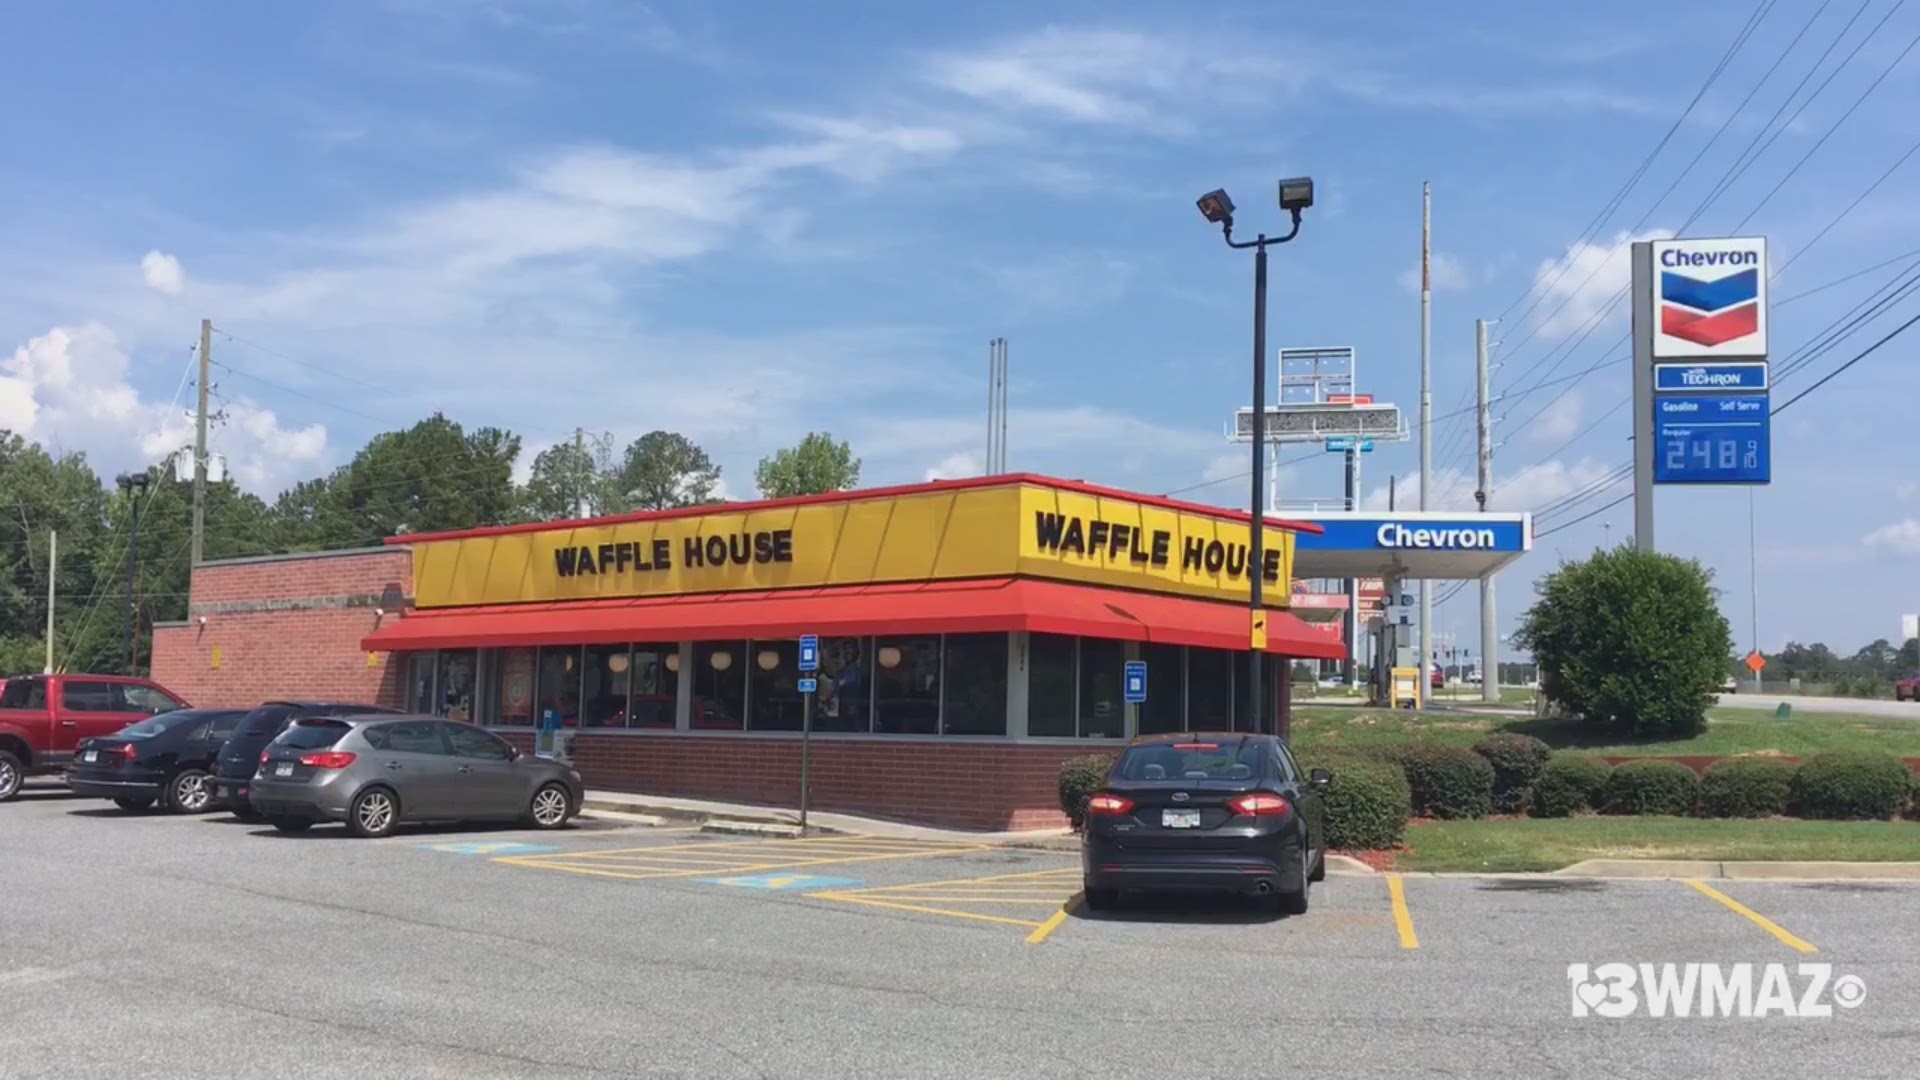 The Waffle House on Riverside Drive was robbed at gunpoint early Wednesday morning by two men who demanded money from the register.